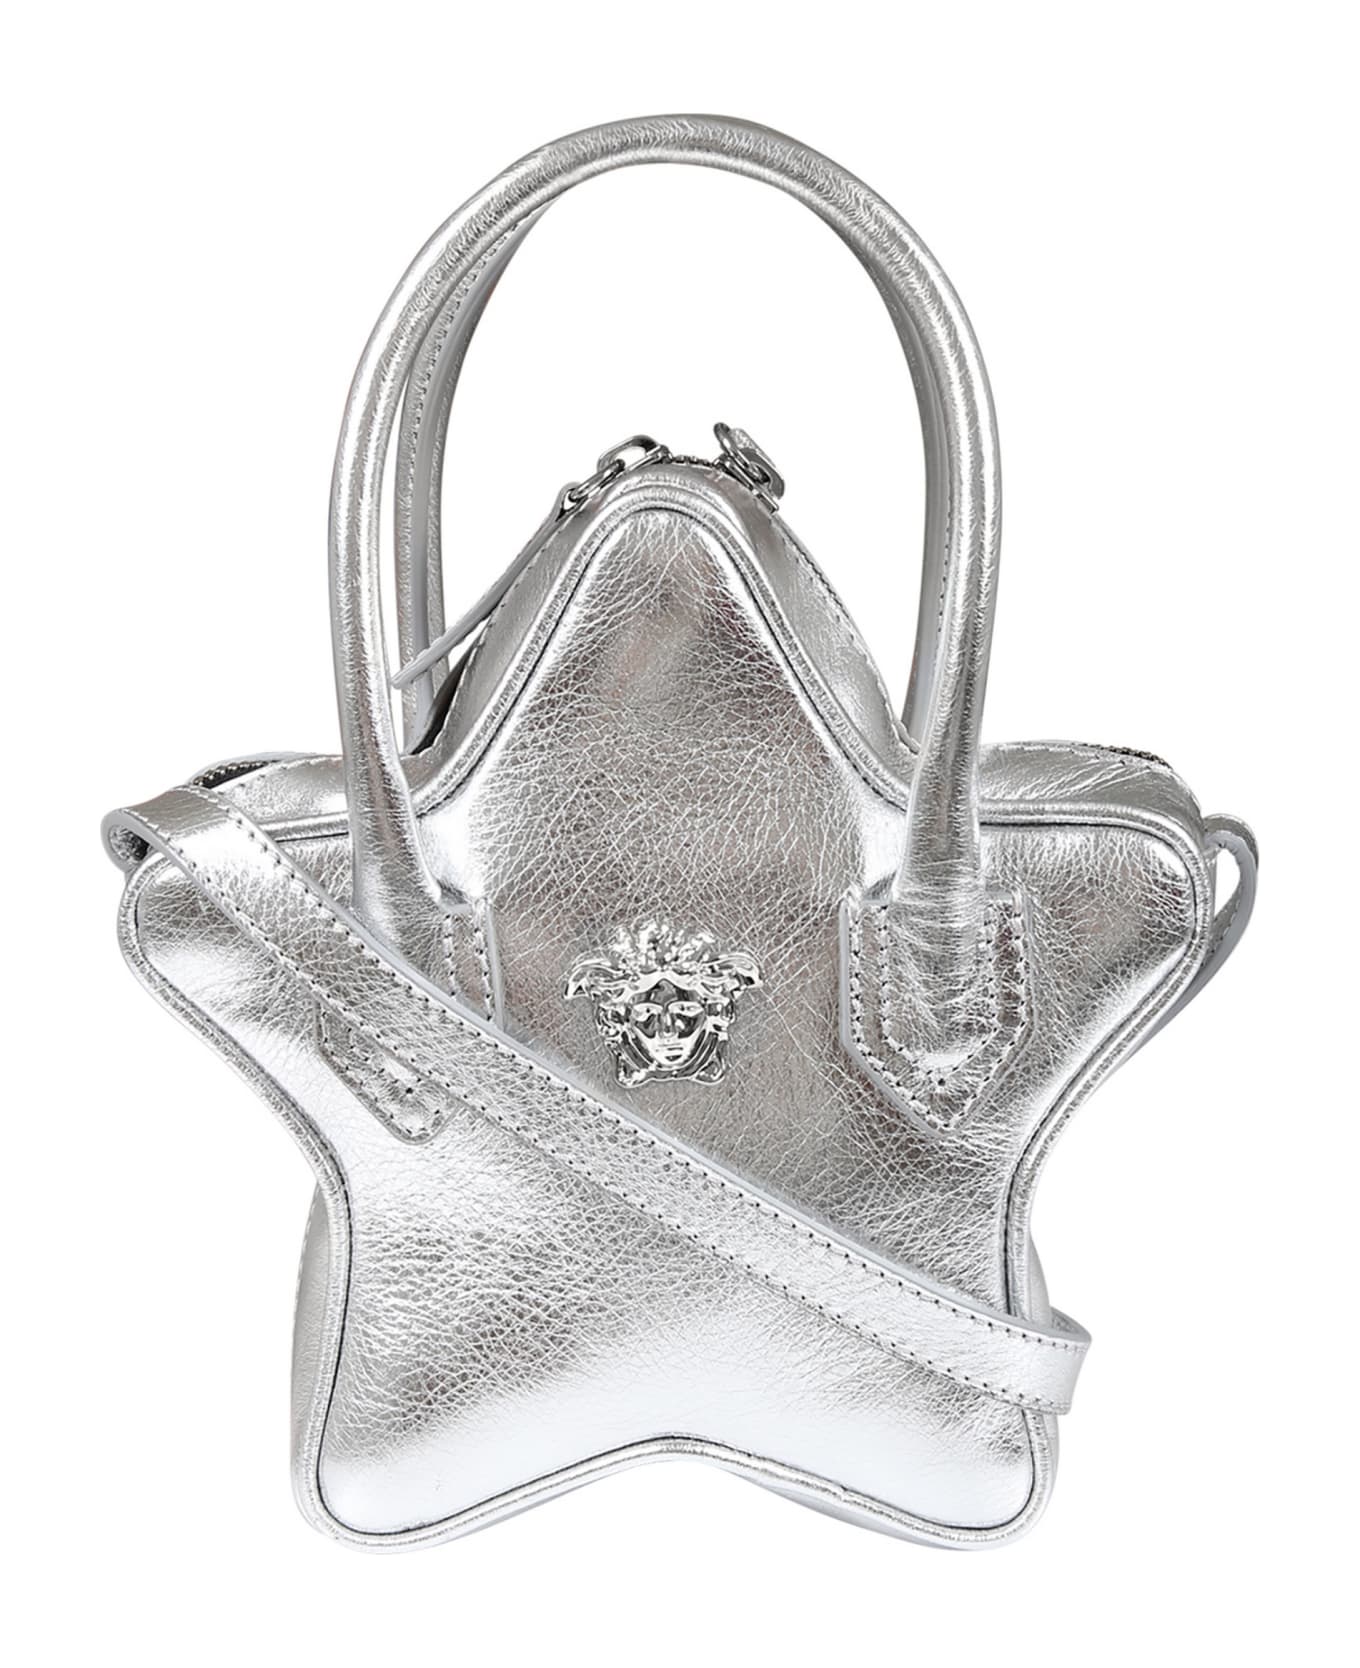 Young Versace Silver Bag For Girl With Medusa - printed calf leather tote bag